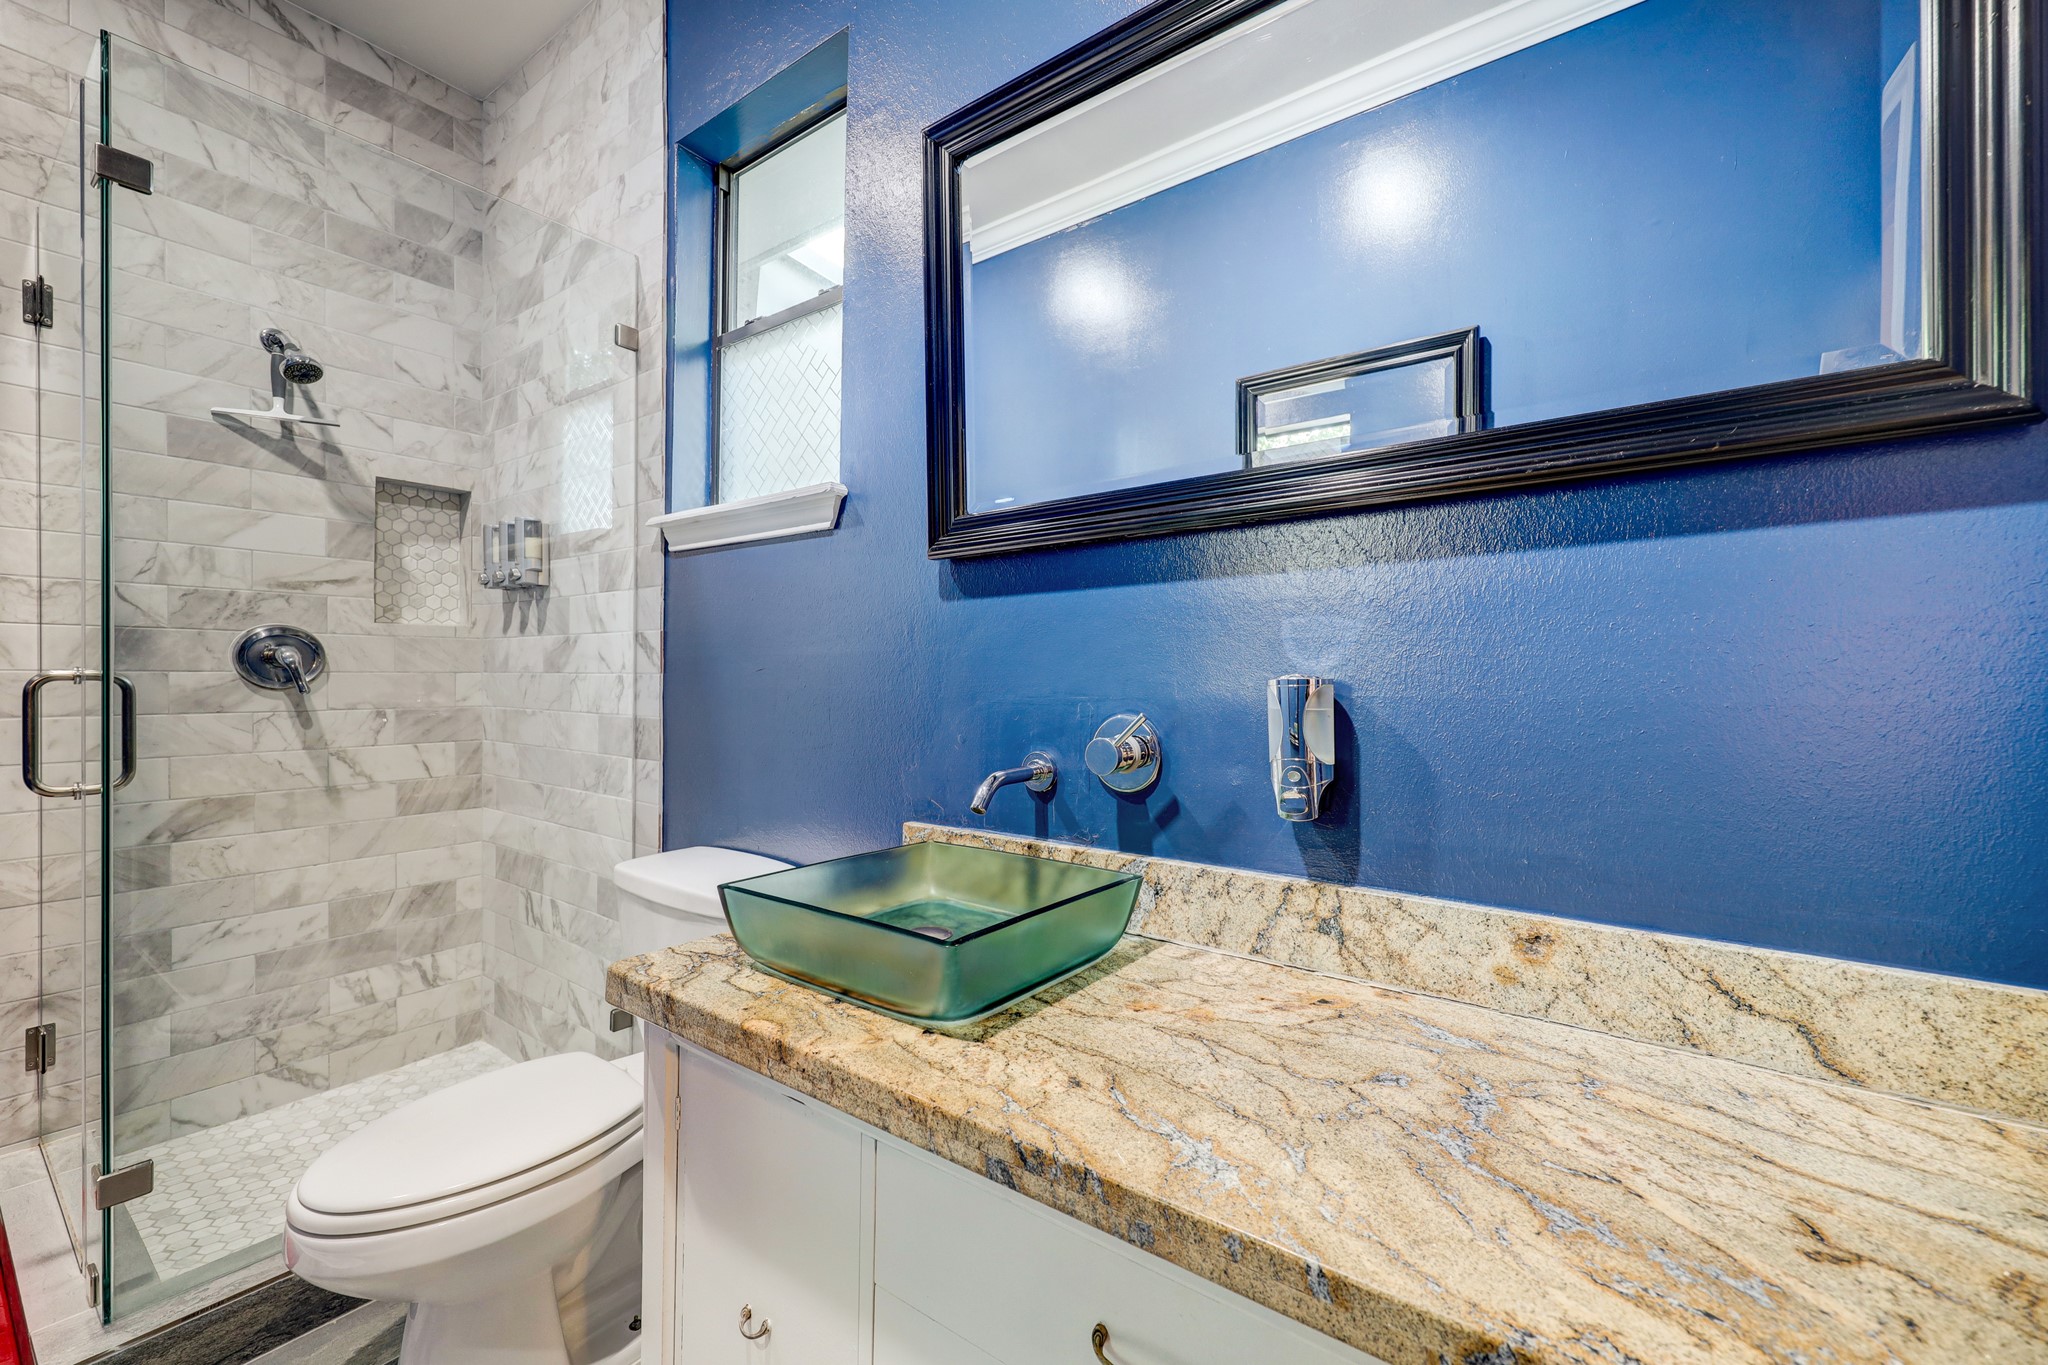 Primary bath updated with standing shower, vessel sink, and large, well-lit closet to hold your wardrobe.